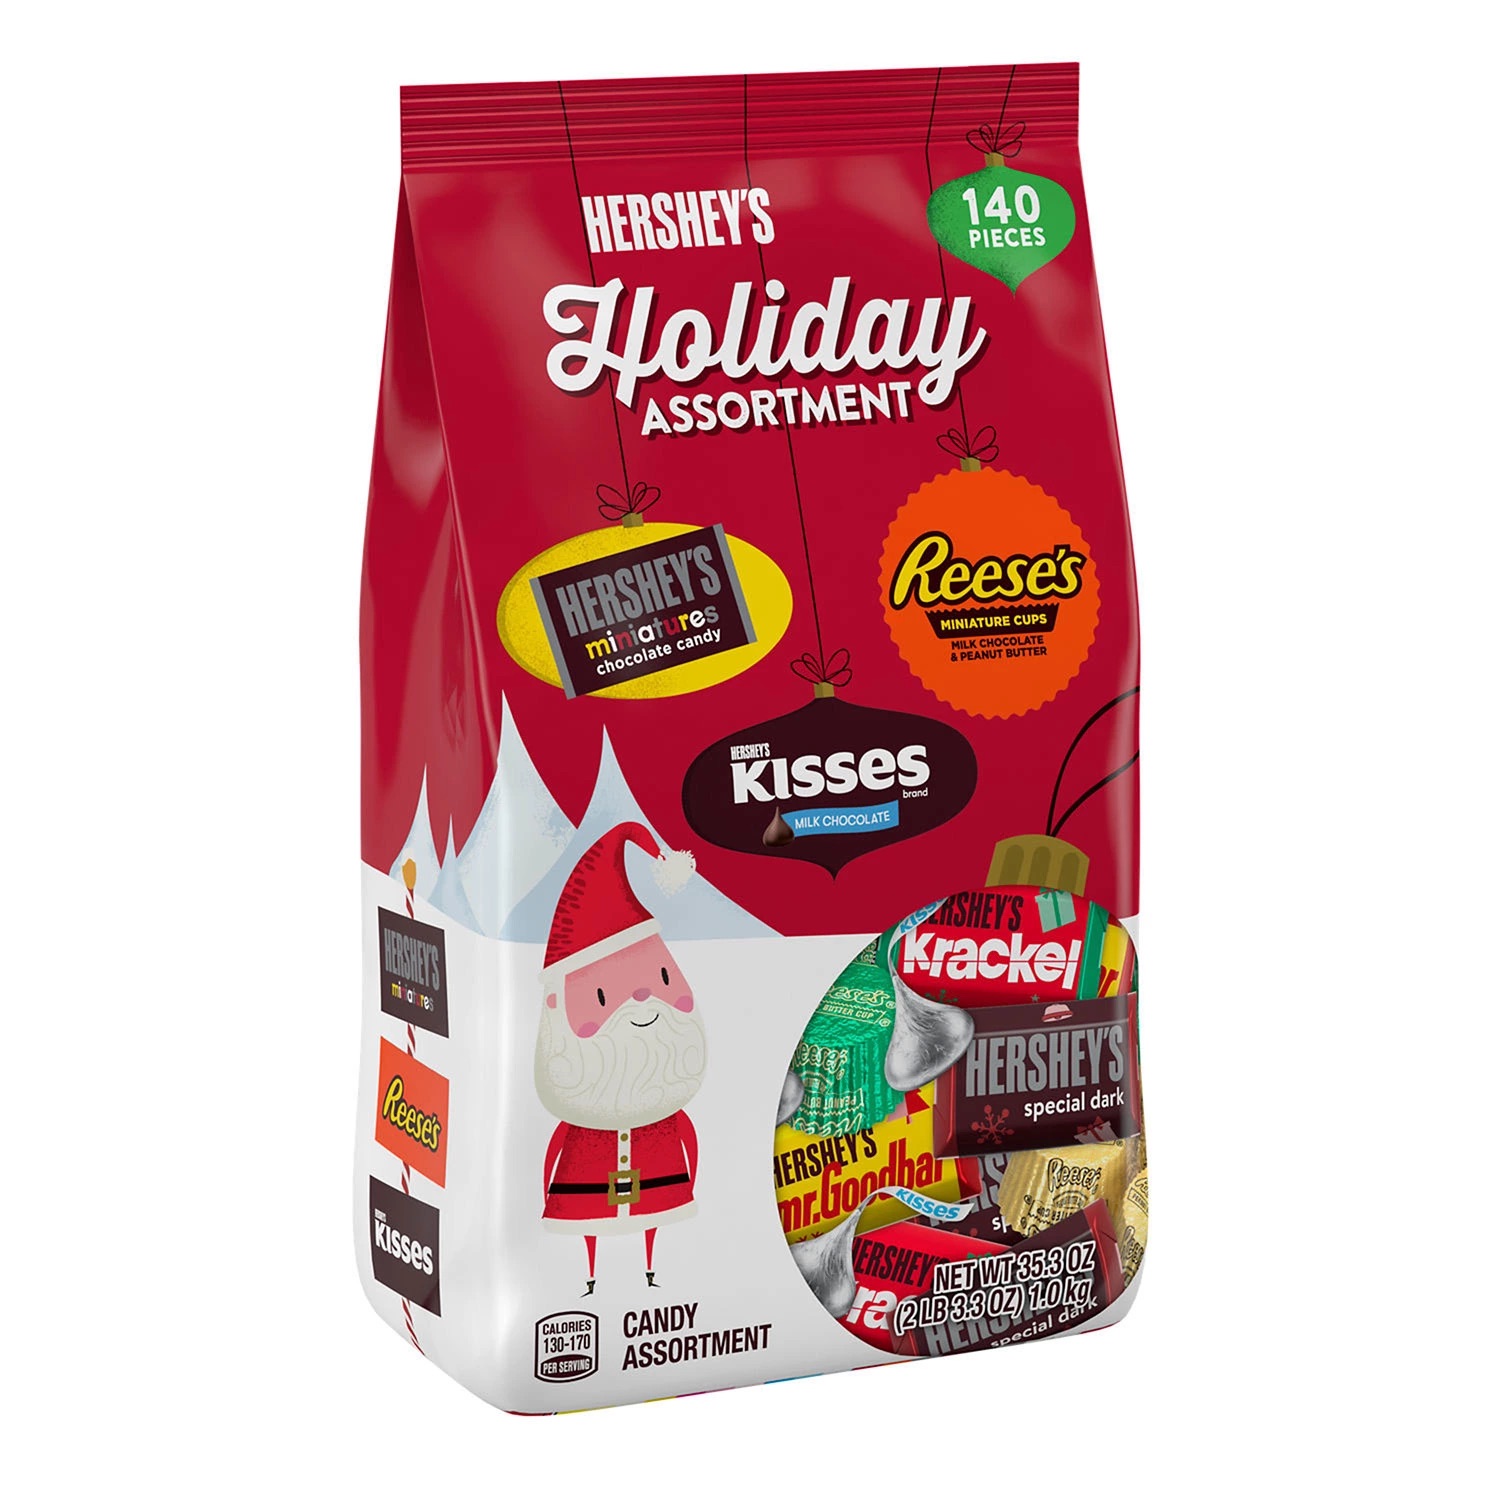 HERSHEY'S and REESE'S Assorted Chocolate, Christmas Candy Bag (35.3 oz., 140 pcs.) - Sam's Club